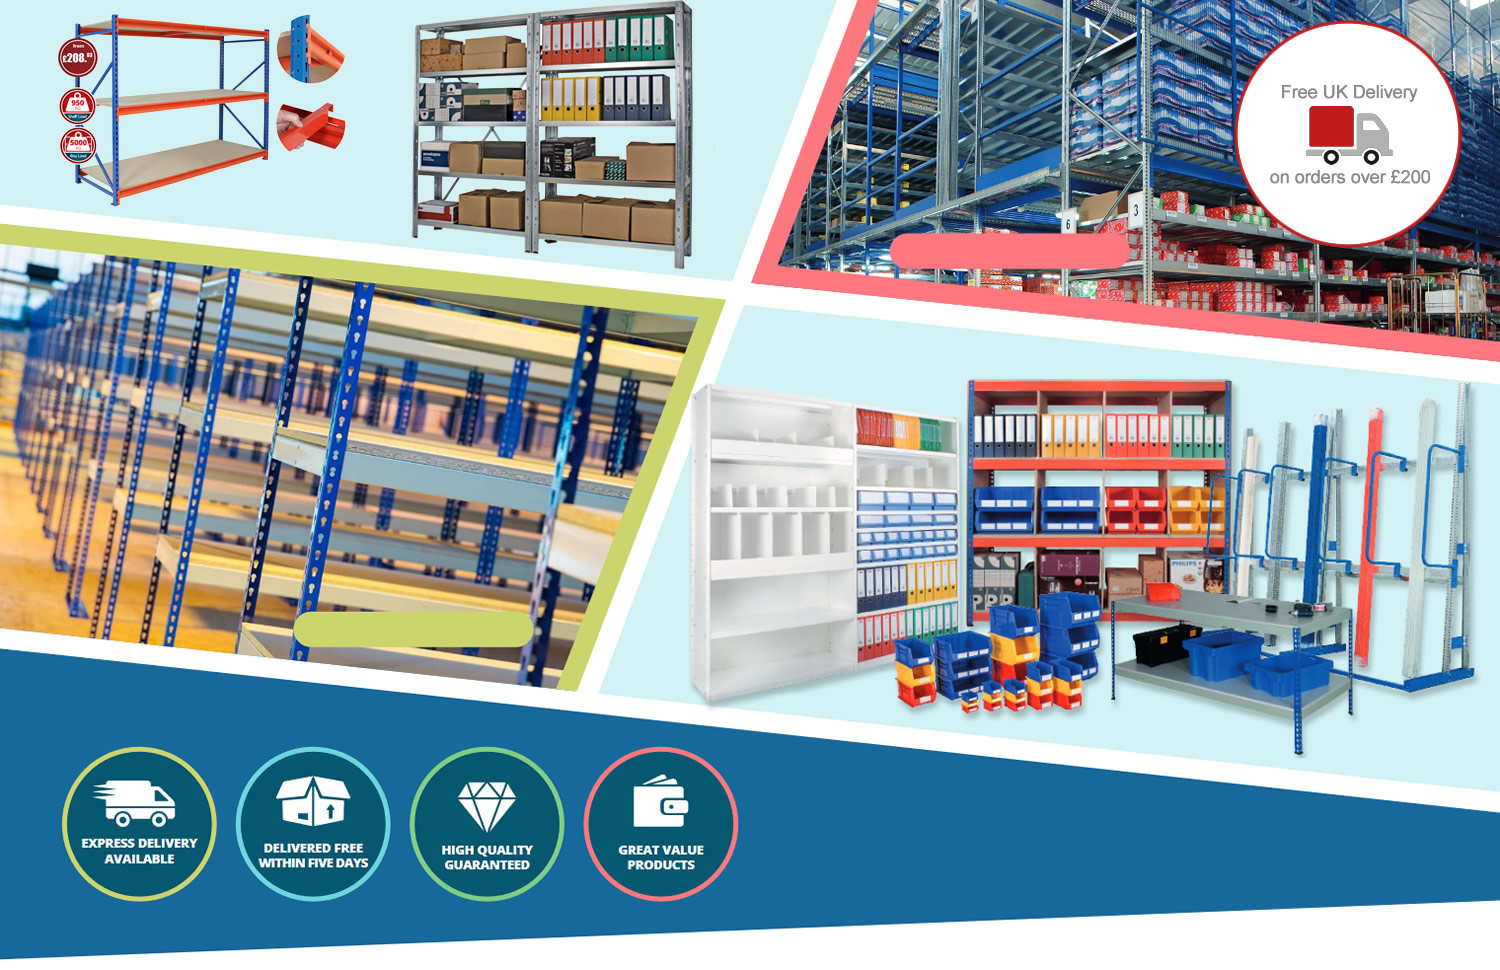 Bay shelving offer storage solutions such as shelving, racking, lockers and cabinets. Free UK delivery over £200